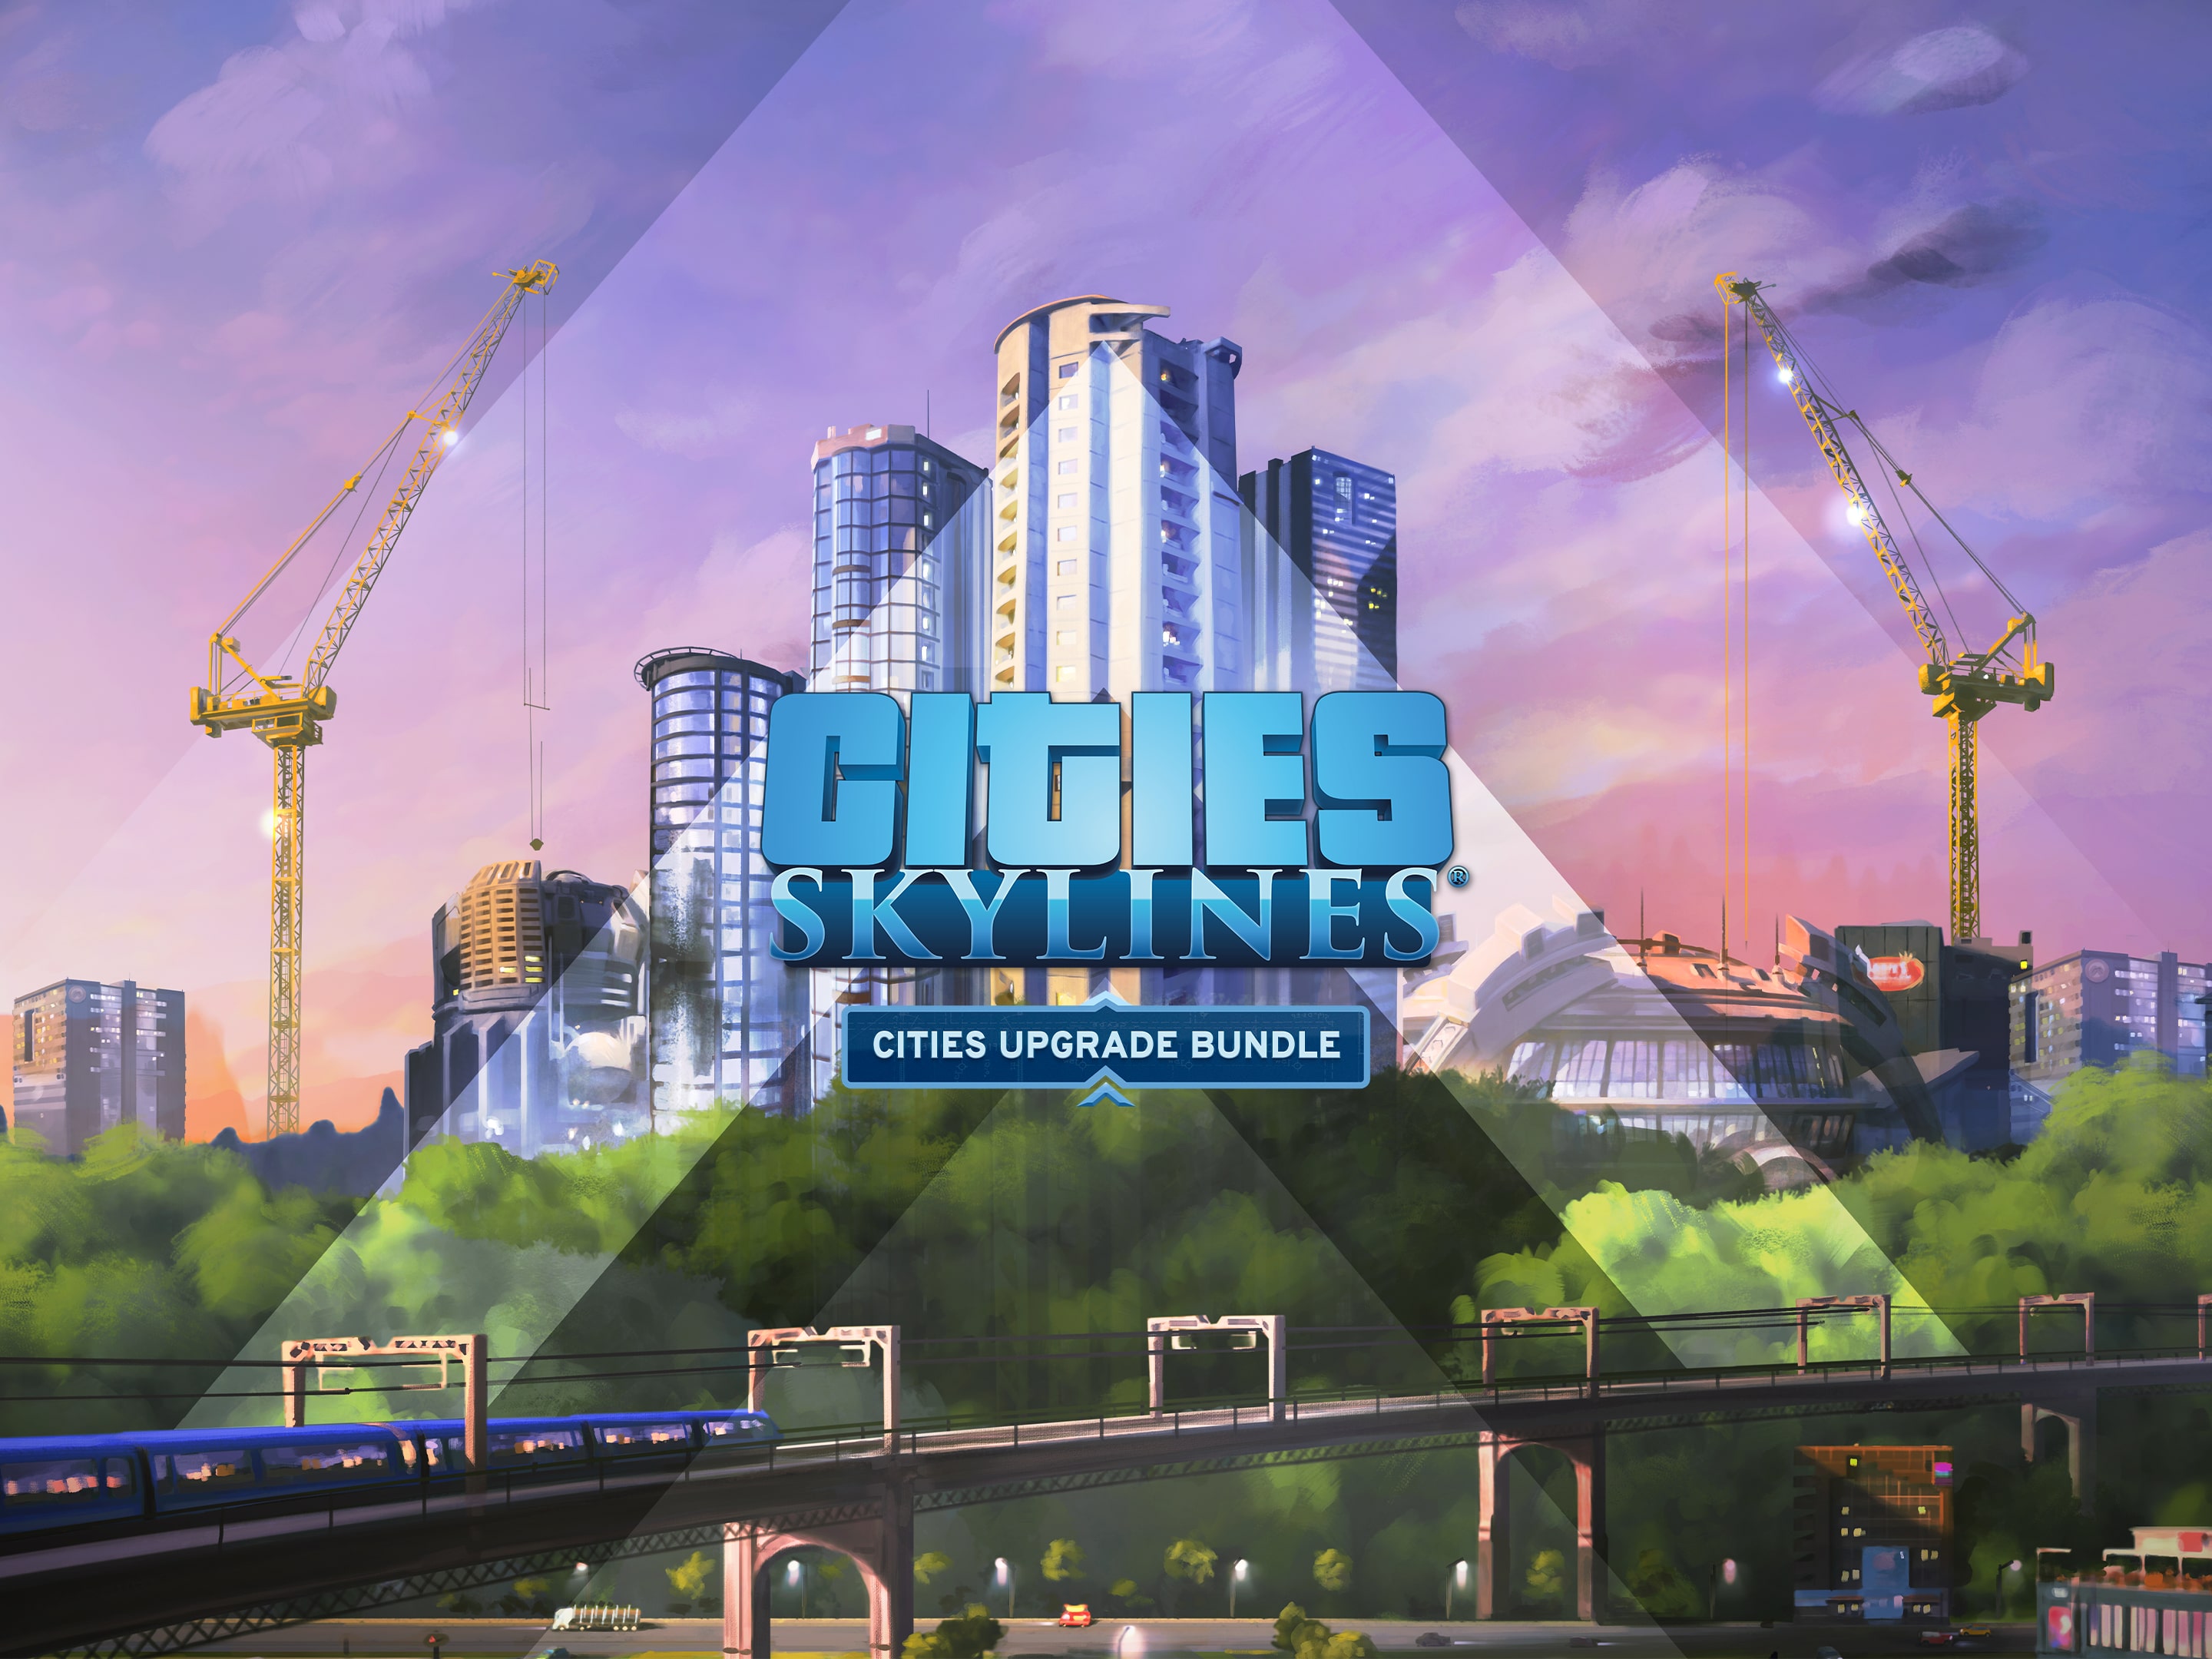 cities skylines deluxe edition whats included